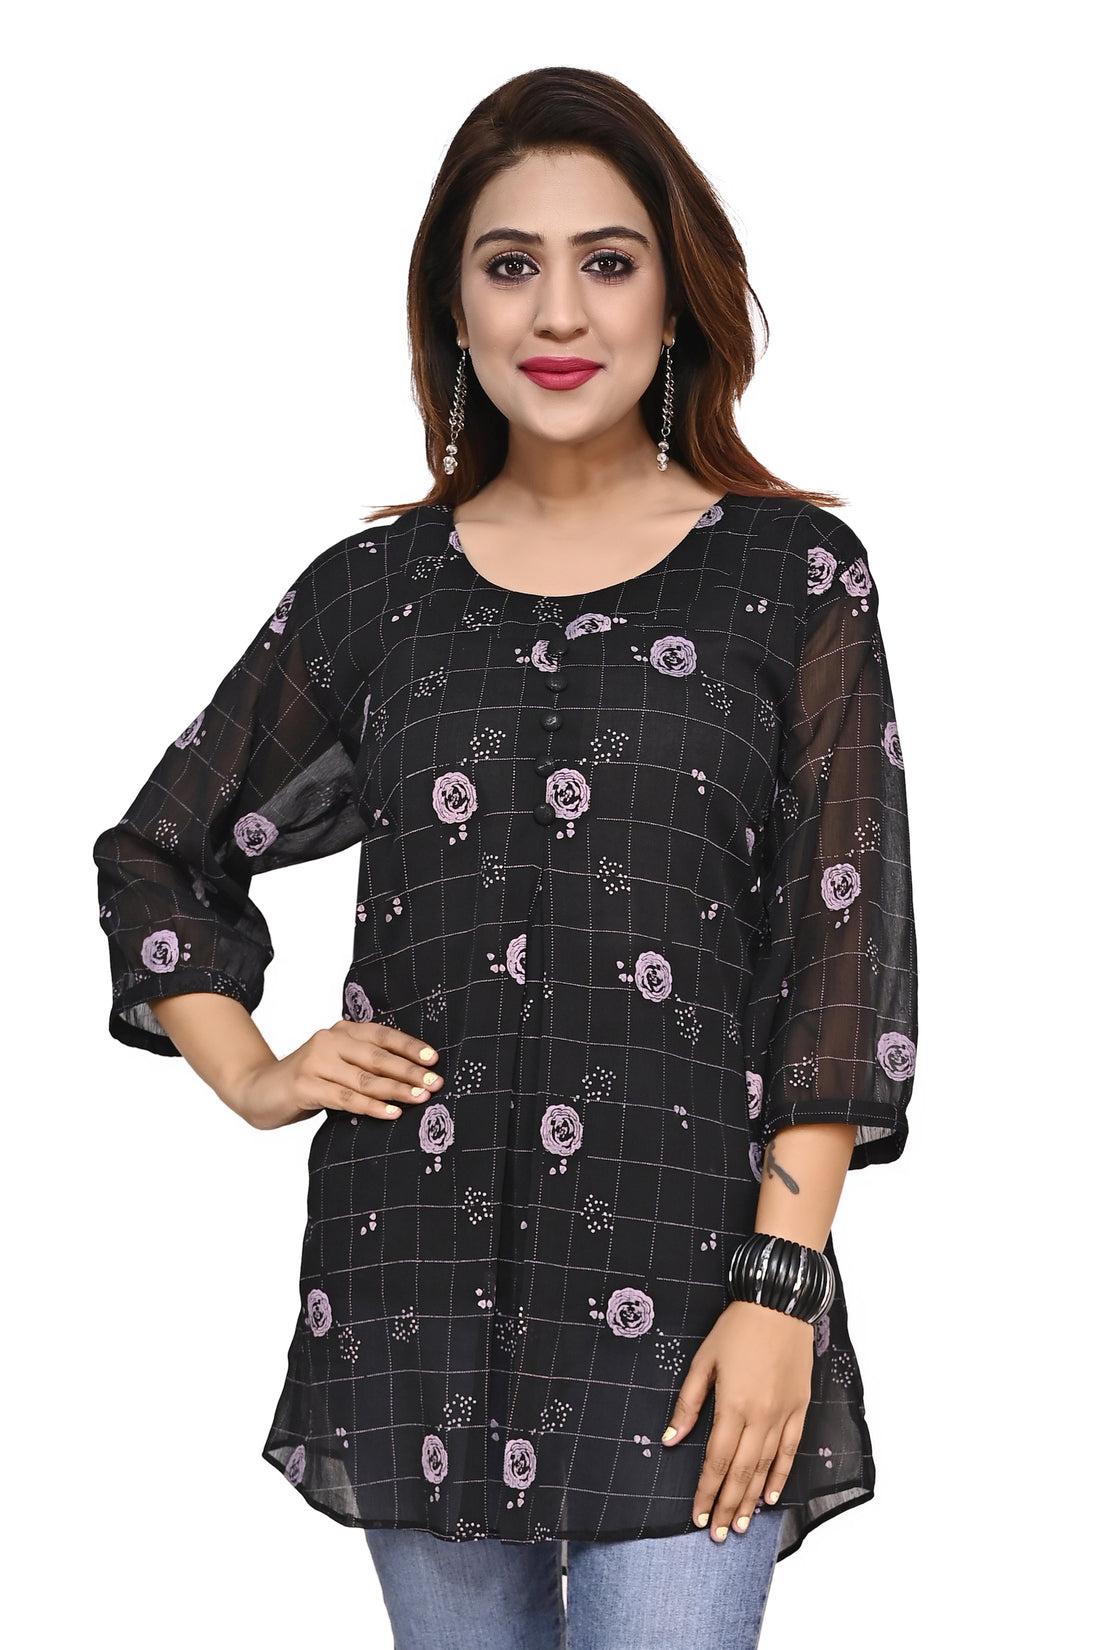 Nirmal online Premium polyester printed top for Women in Black colour